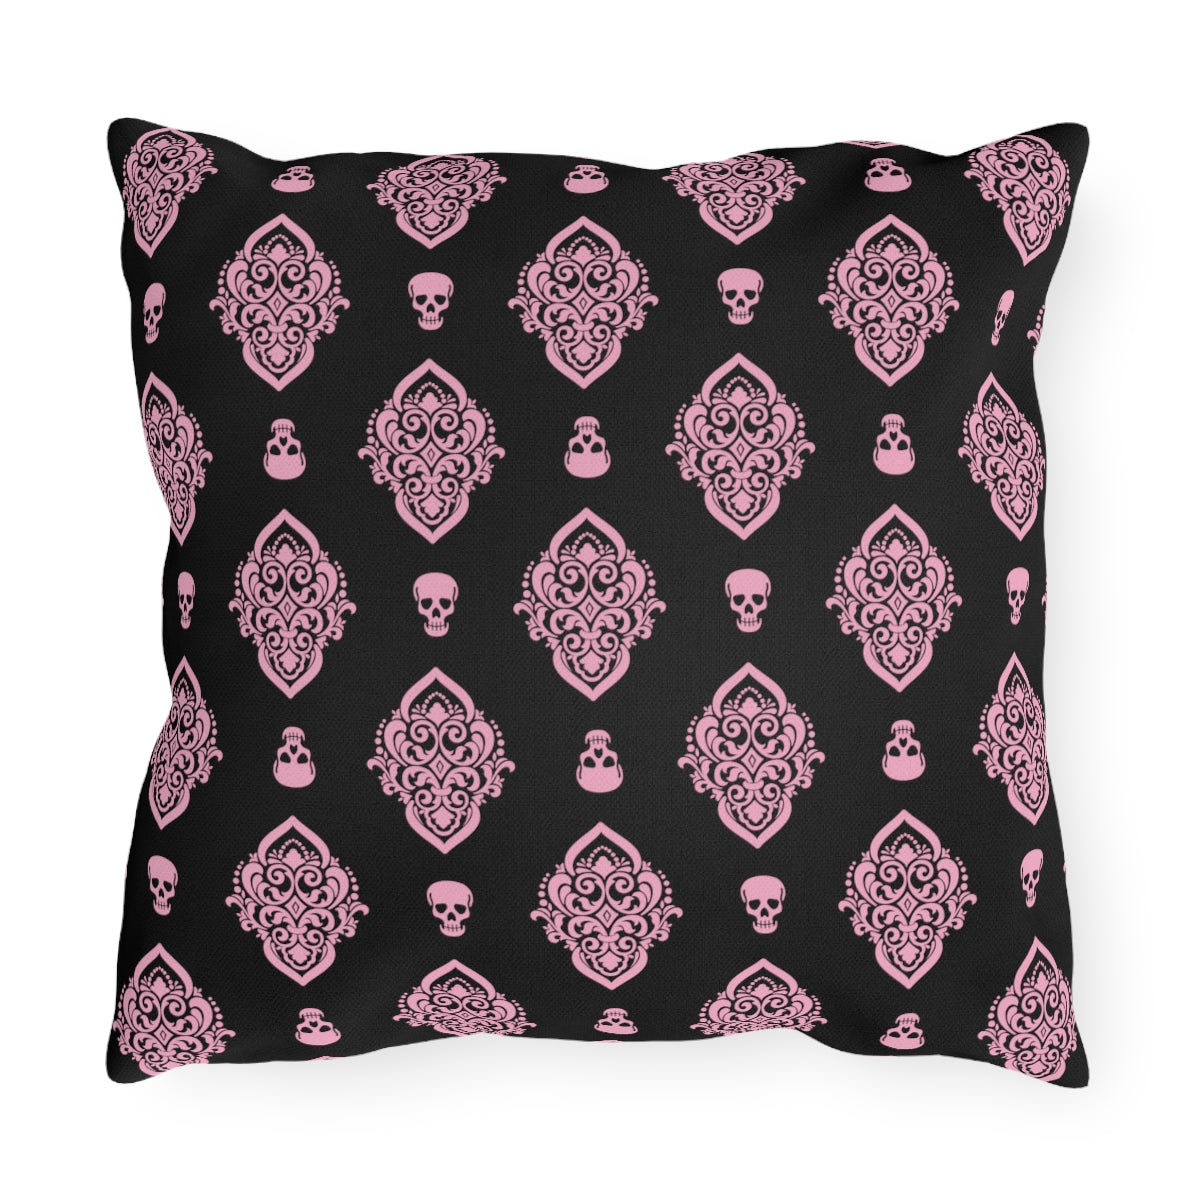 Pink and Black Skull Damask Outdoor Pillows